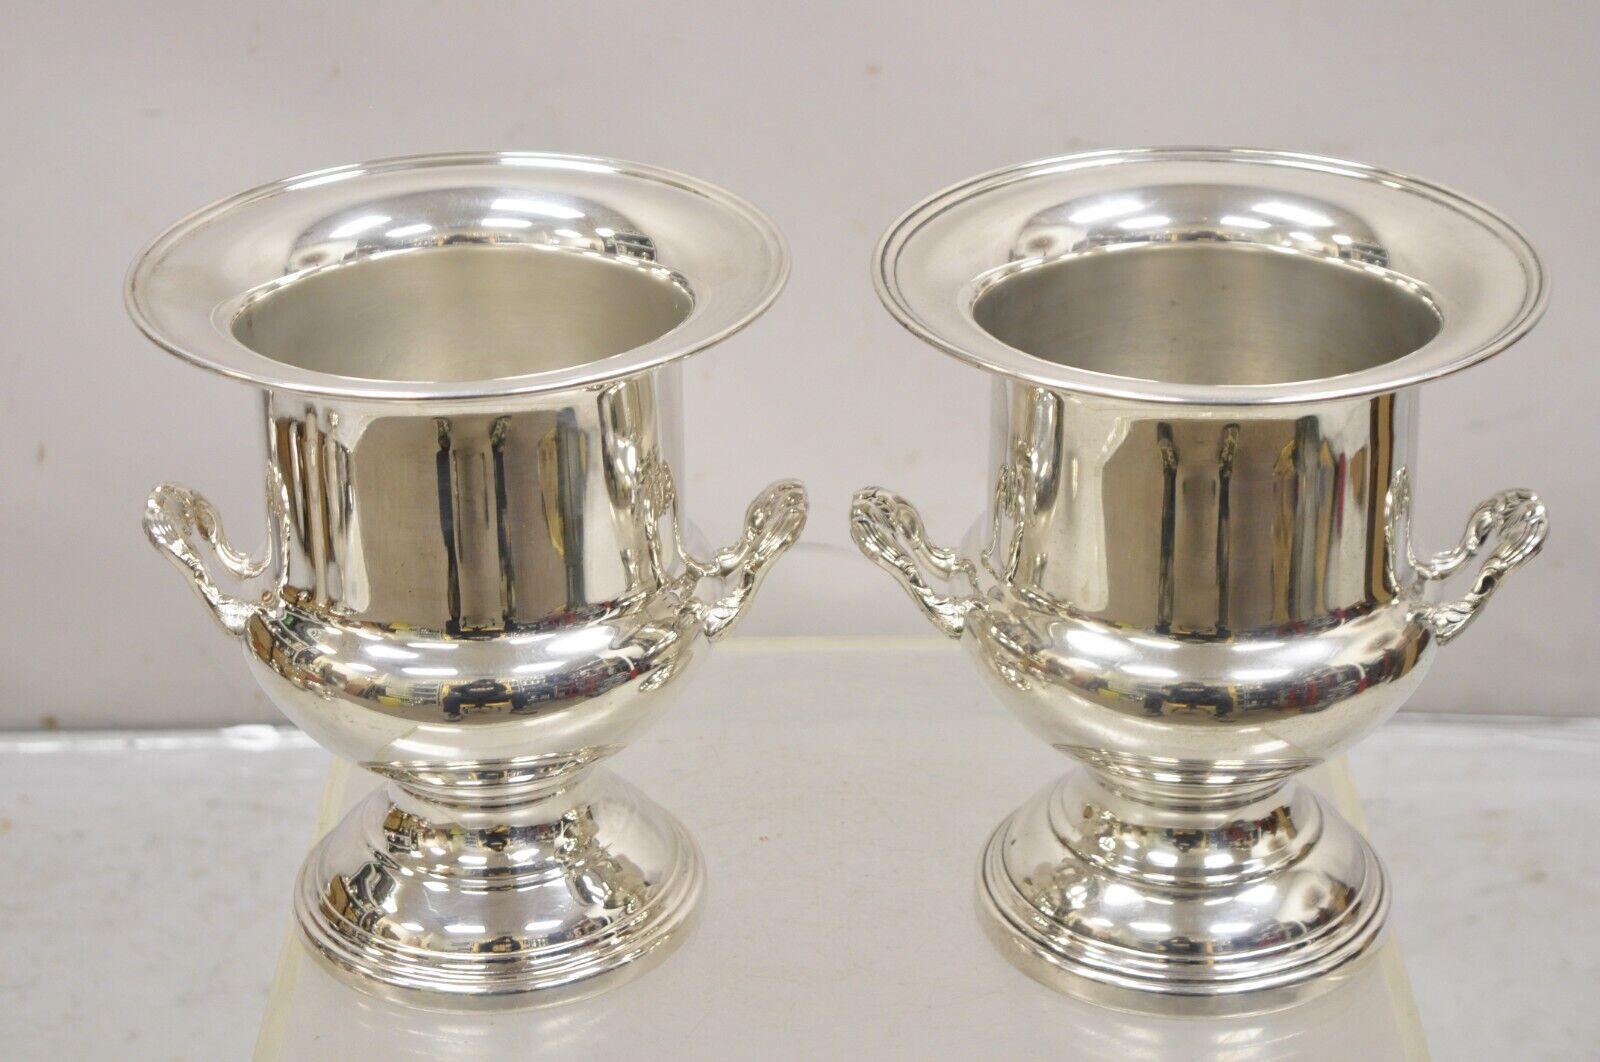 Pair of Vintage Oneida Silver Plated Trophy Cup Champagne Chiller Ice Buckets. Circa Mid to Late 20th Century. Measurements:  10